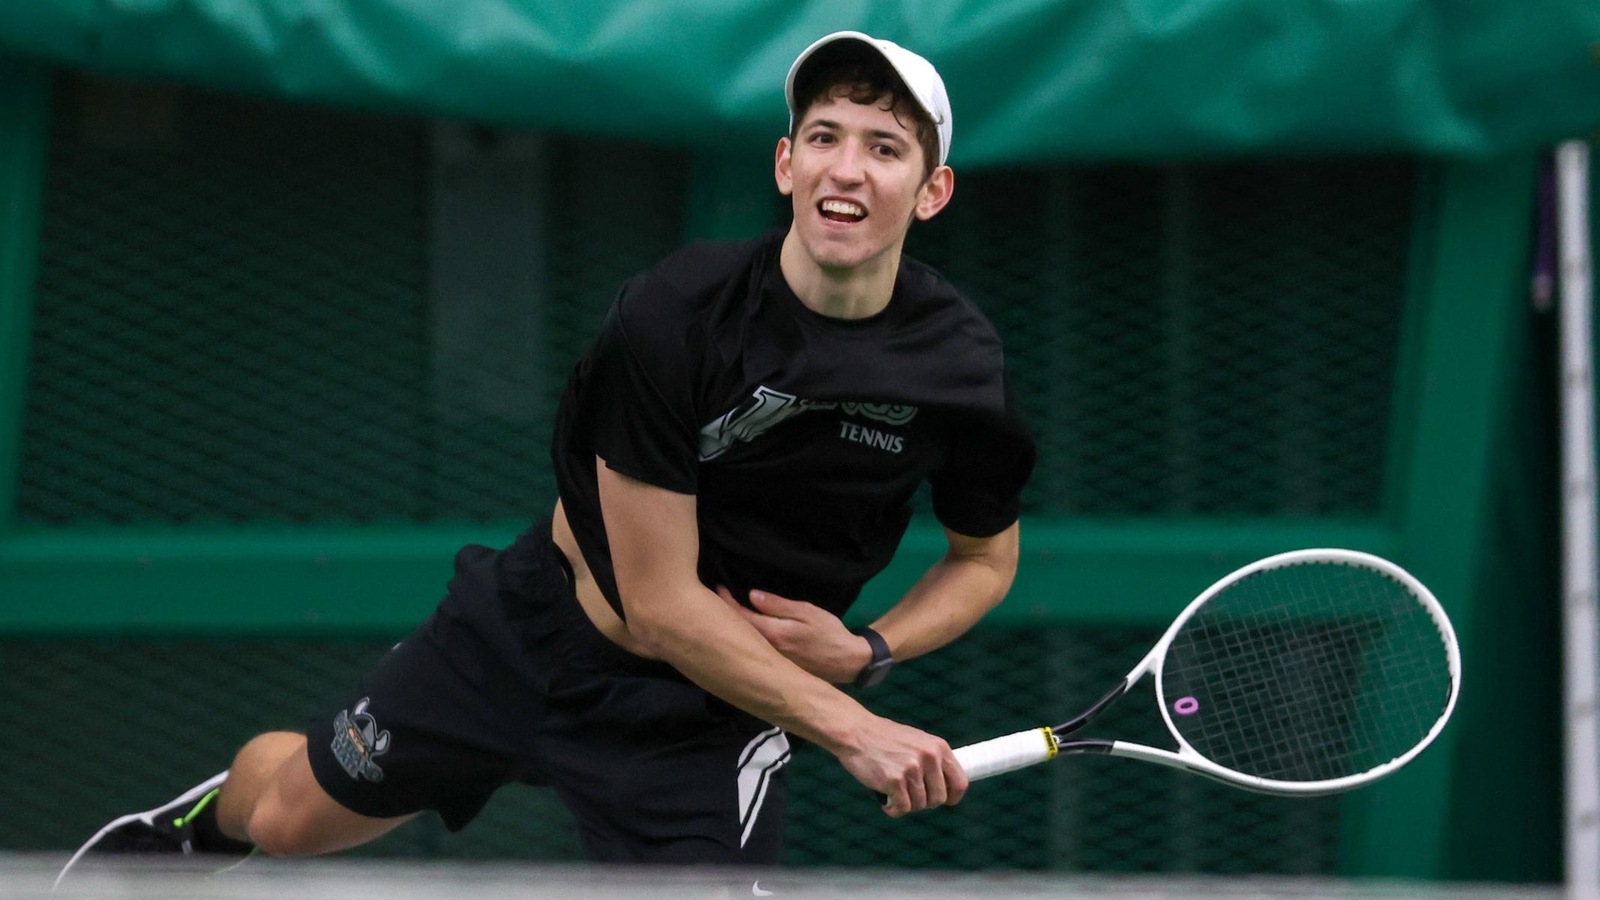 Cleveland State Men’s Tennis Earns 7-0 Victory Over Duquesne